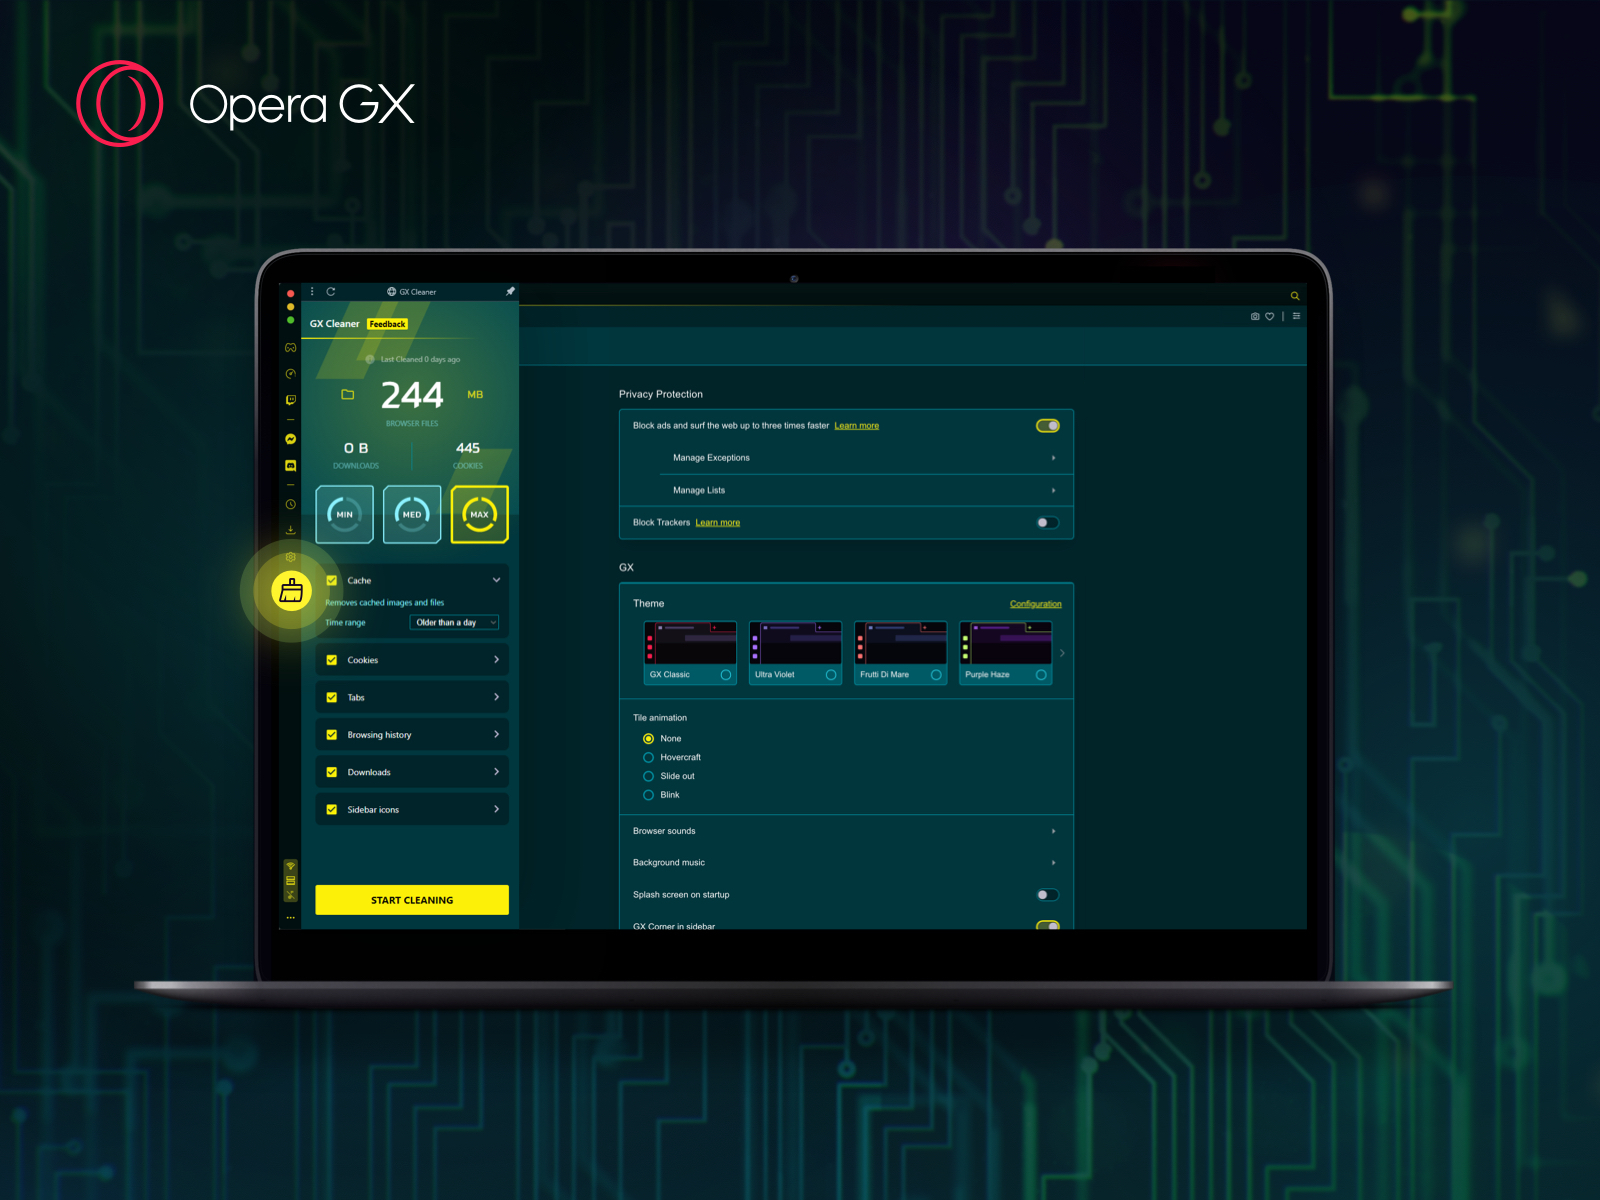 Opera GX now with smart cleaner and color themes